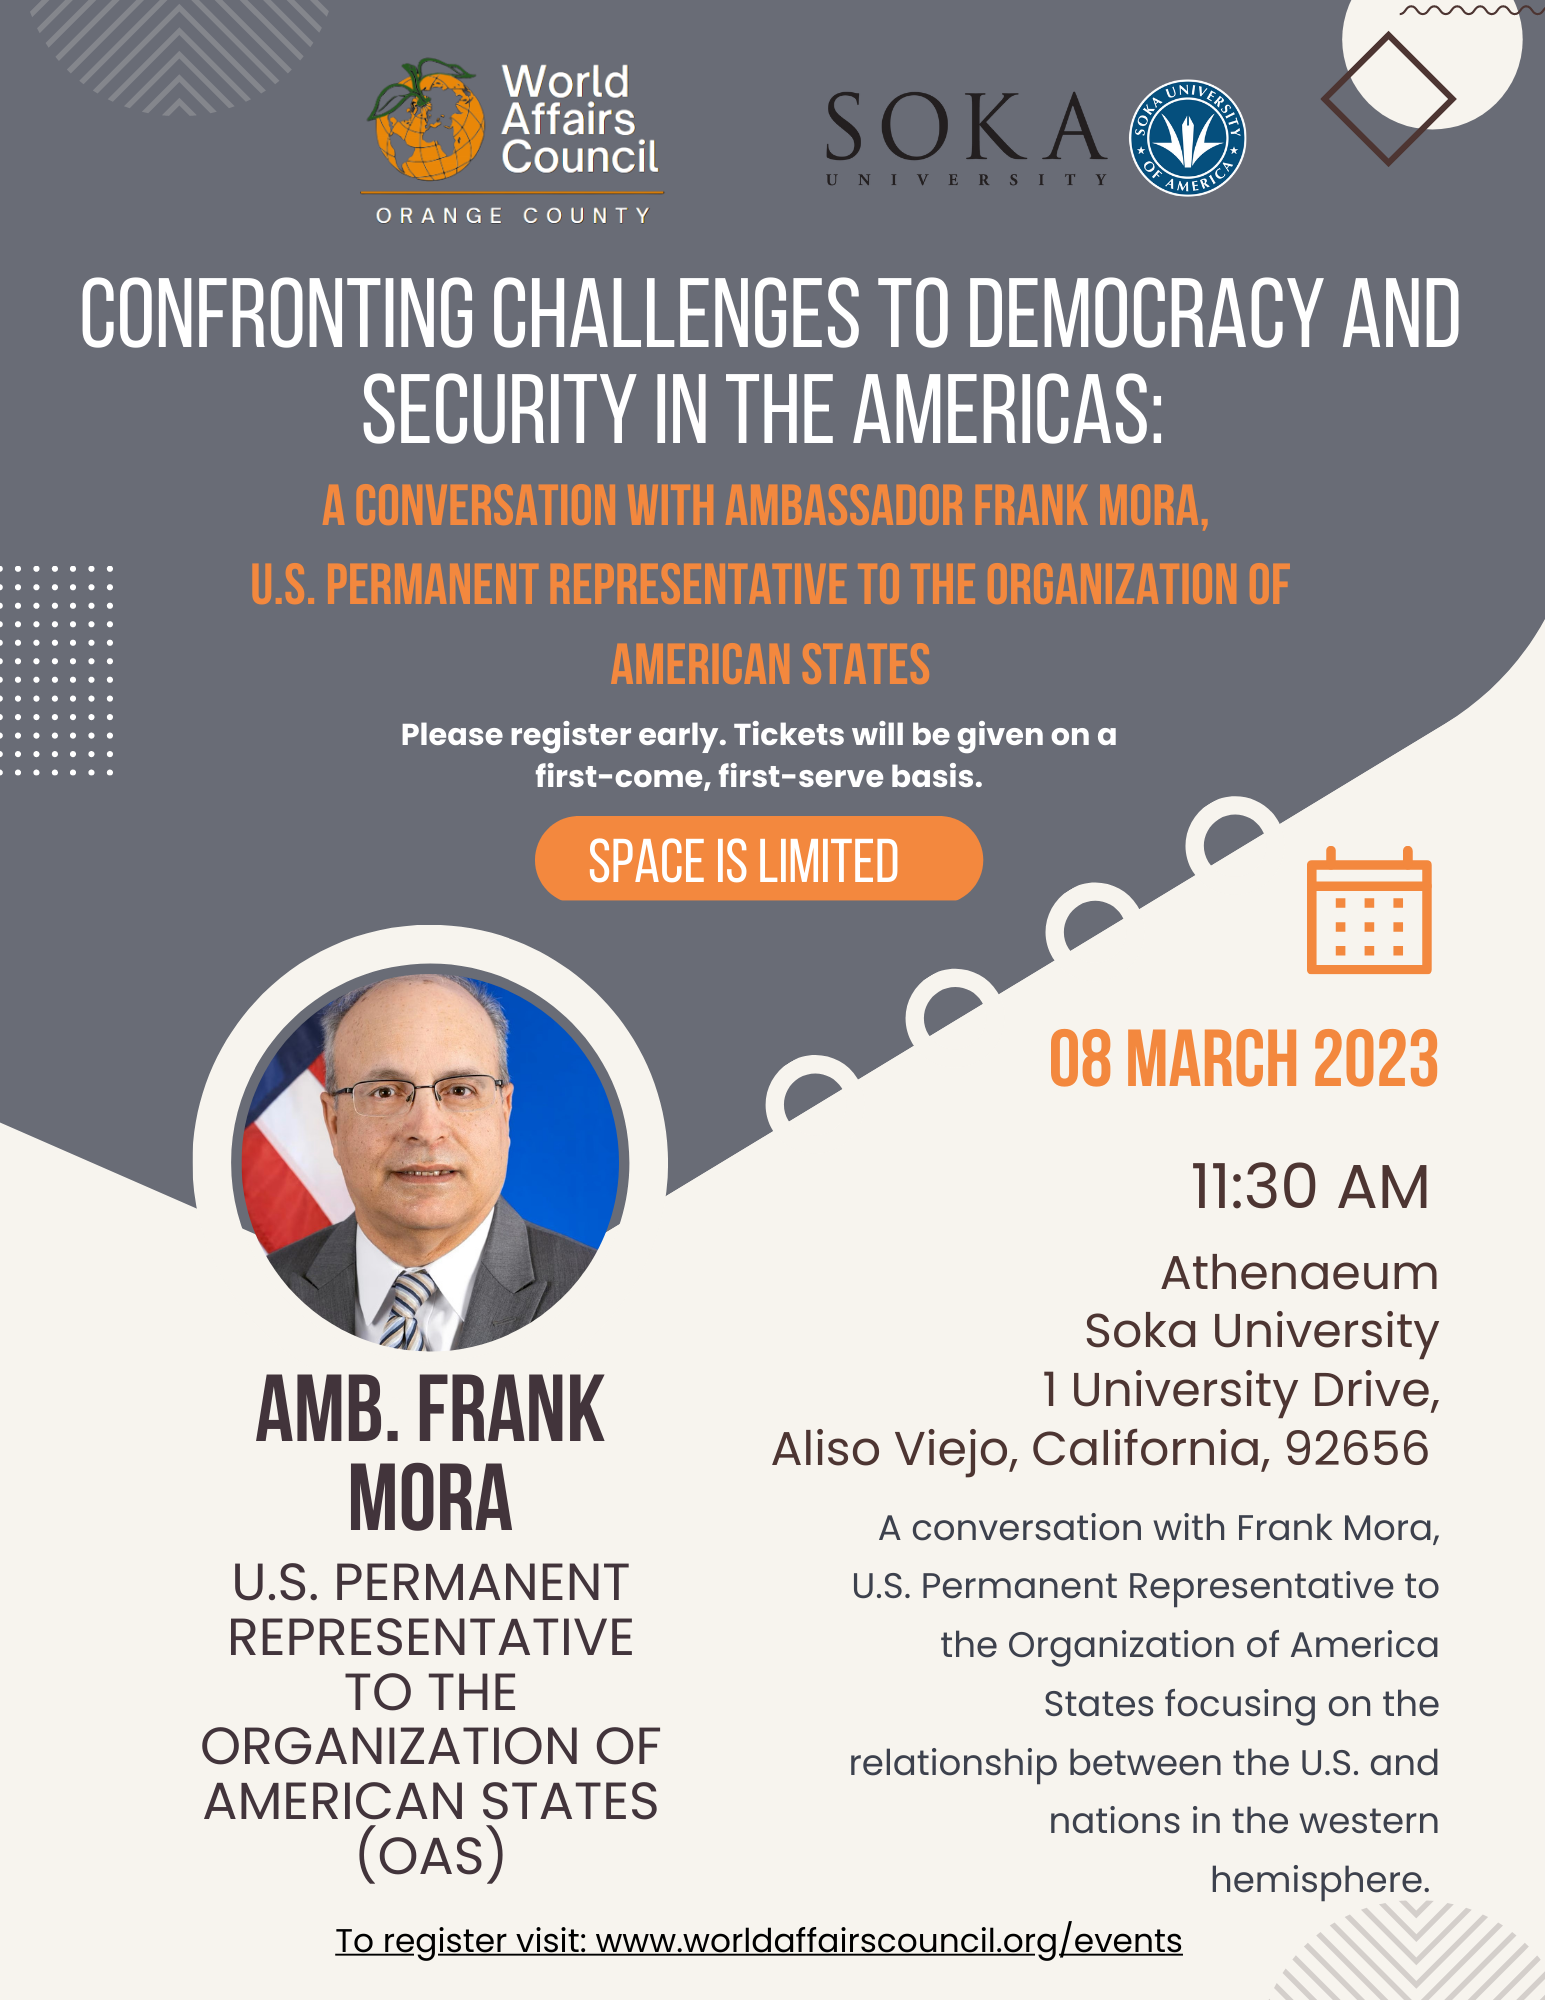 Confronting Challenges to Democracy and Security in the Americas